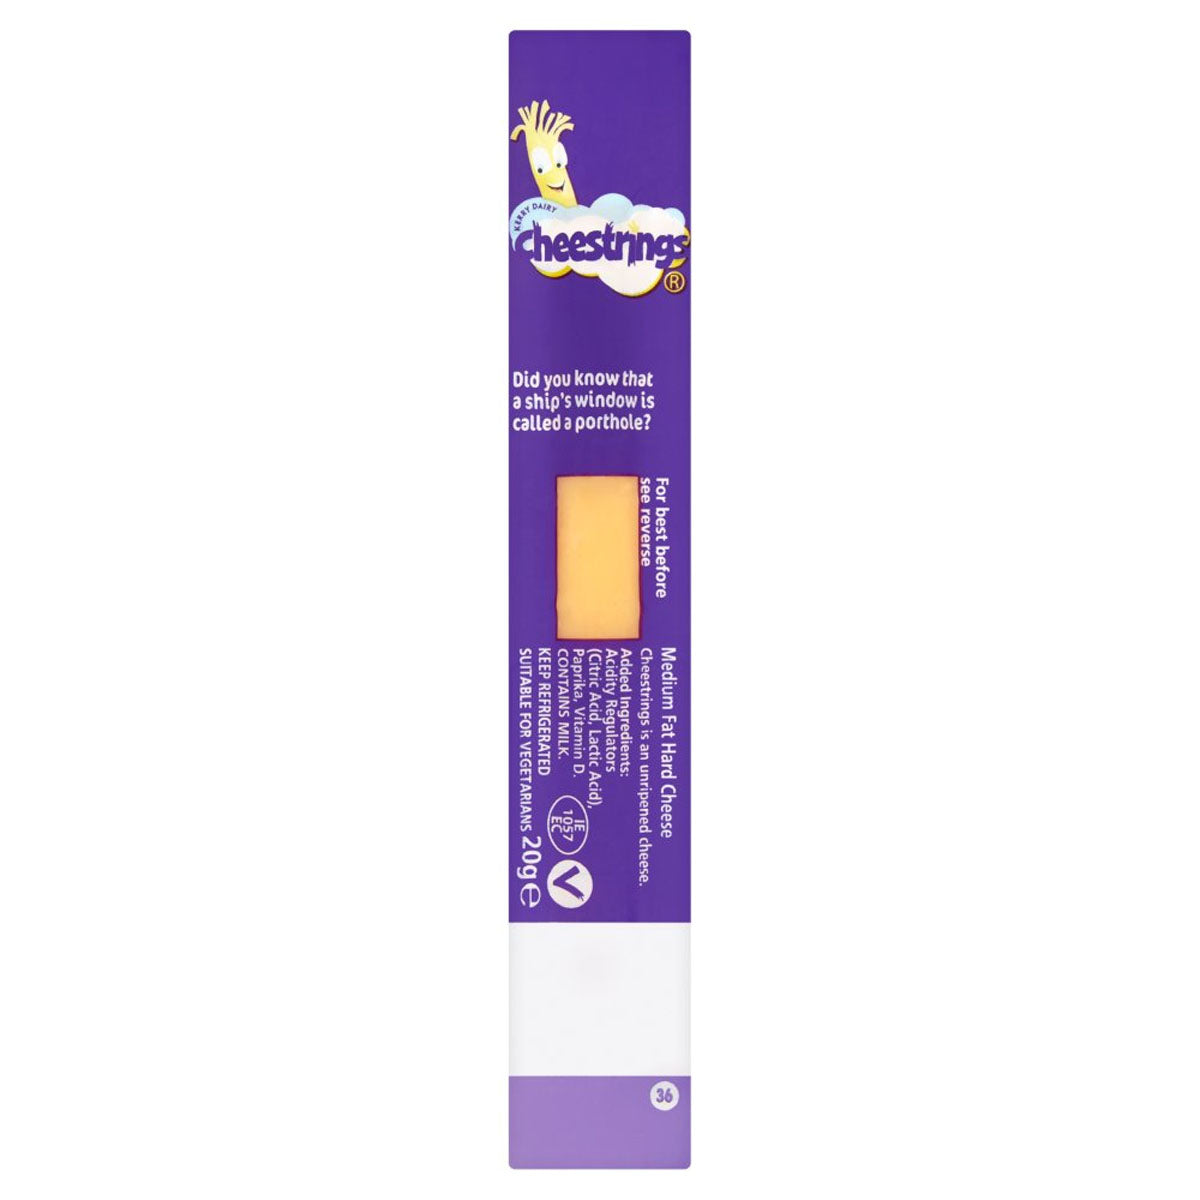 Kerry Dairy - Cheestrings - 20g - Continental Food Store